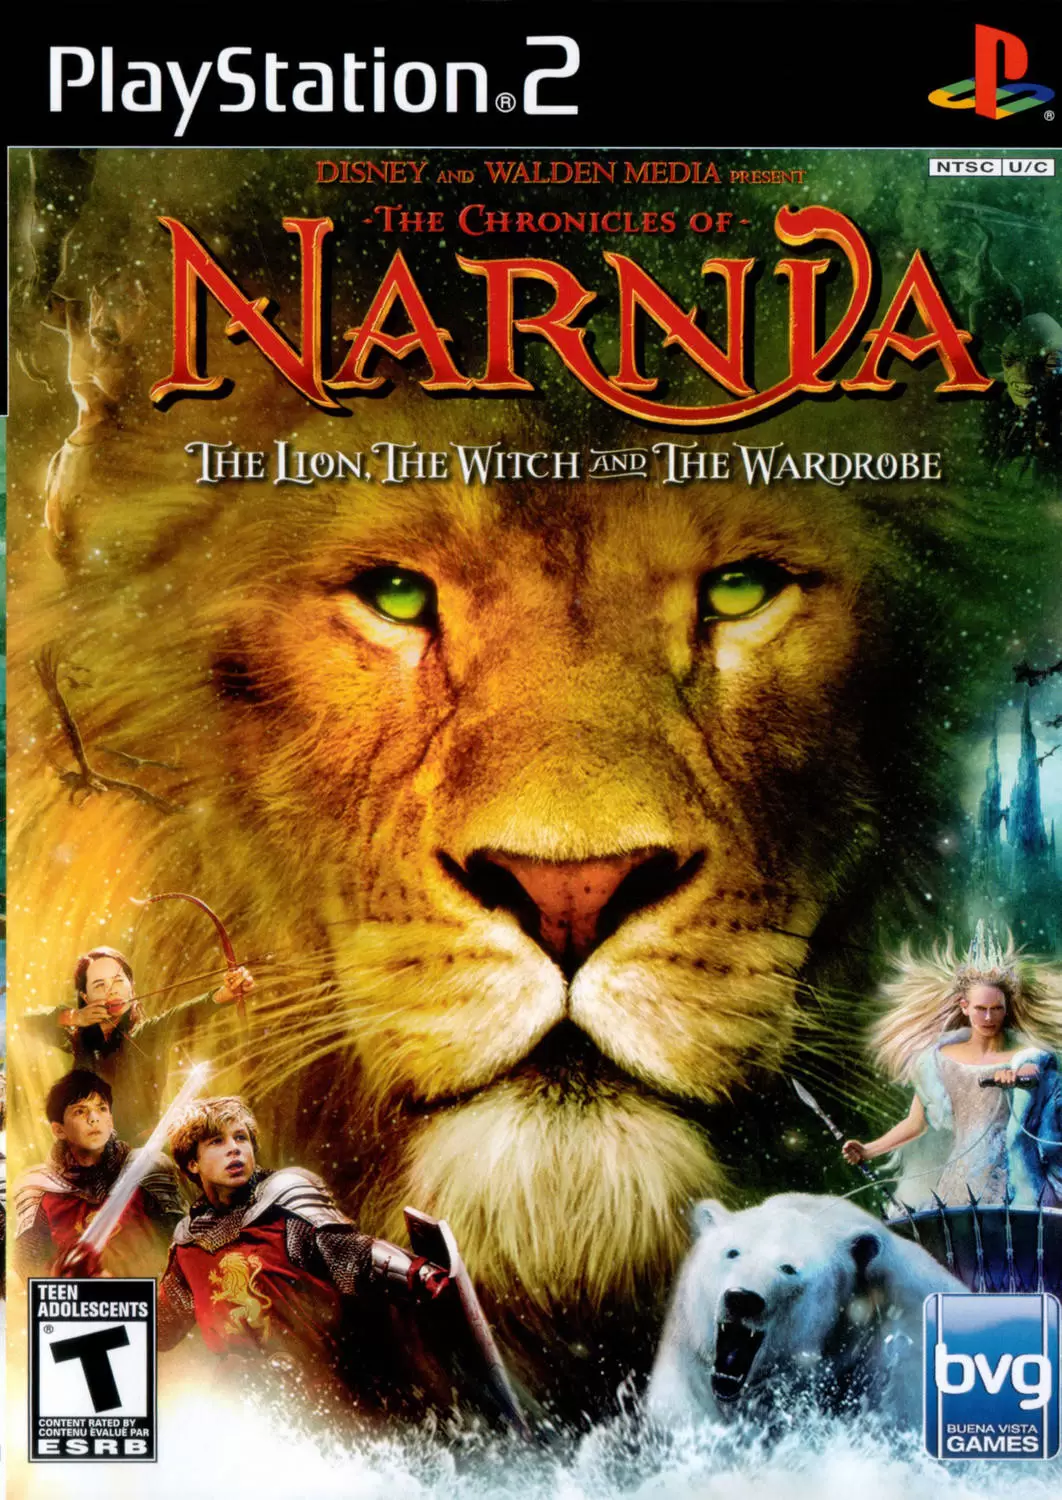 PS2 Games - The Chronicles of Narnia: The Lion, the Witch and the Wardrobe